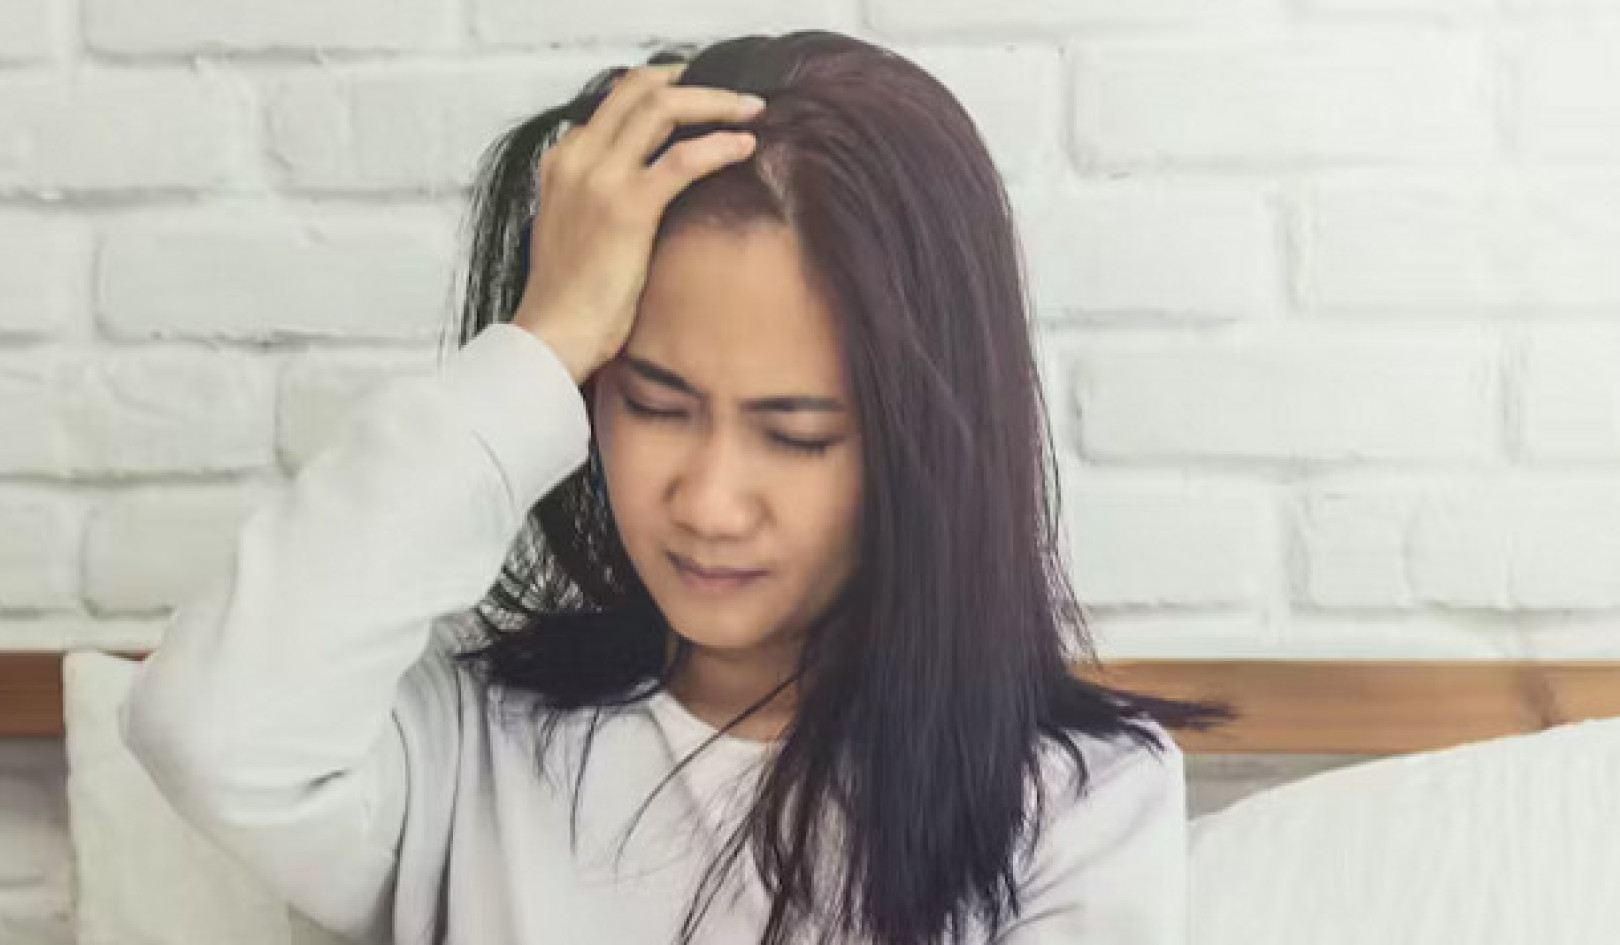 Migraine: The Underdiagnosed and Undertreated Headache Disorder